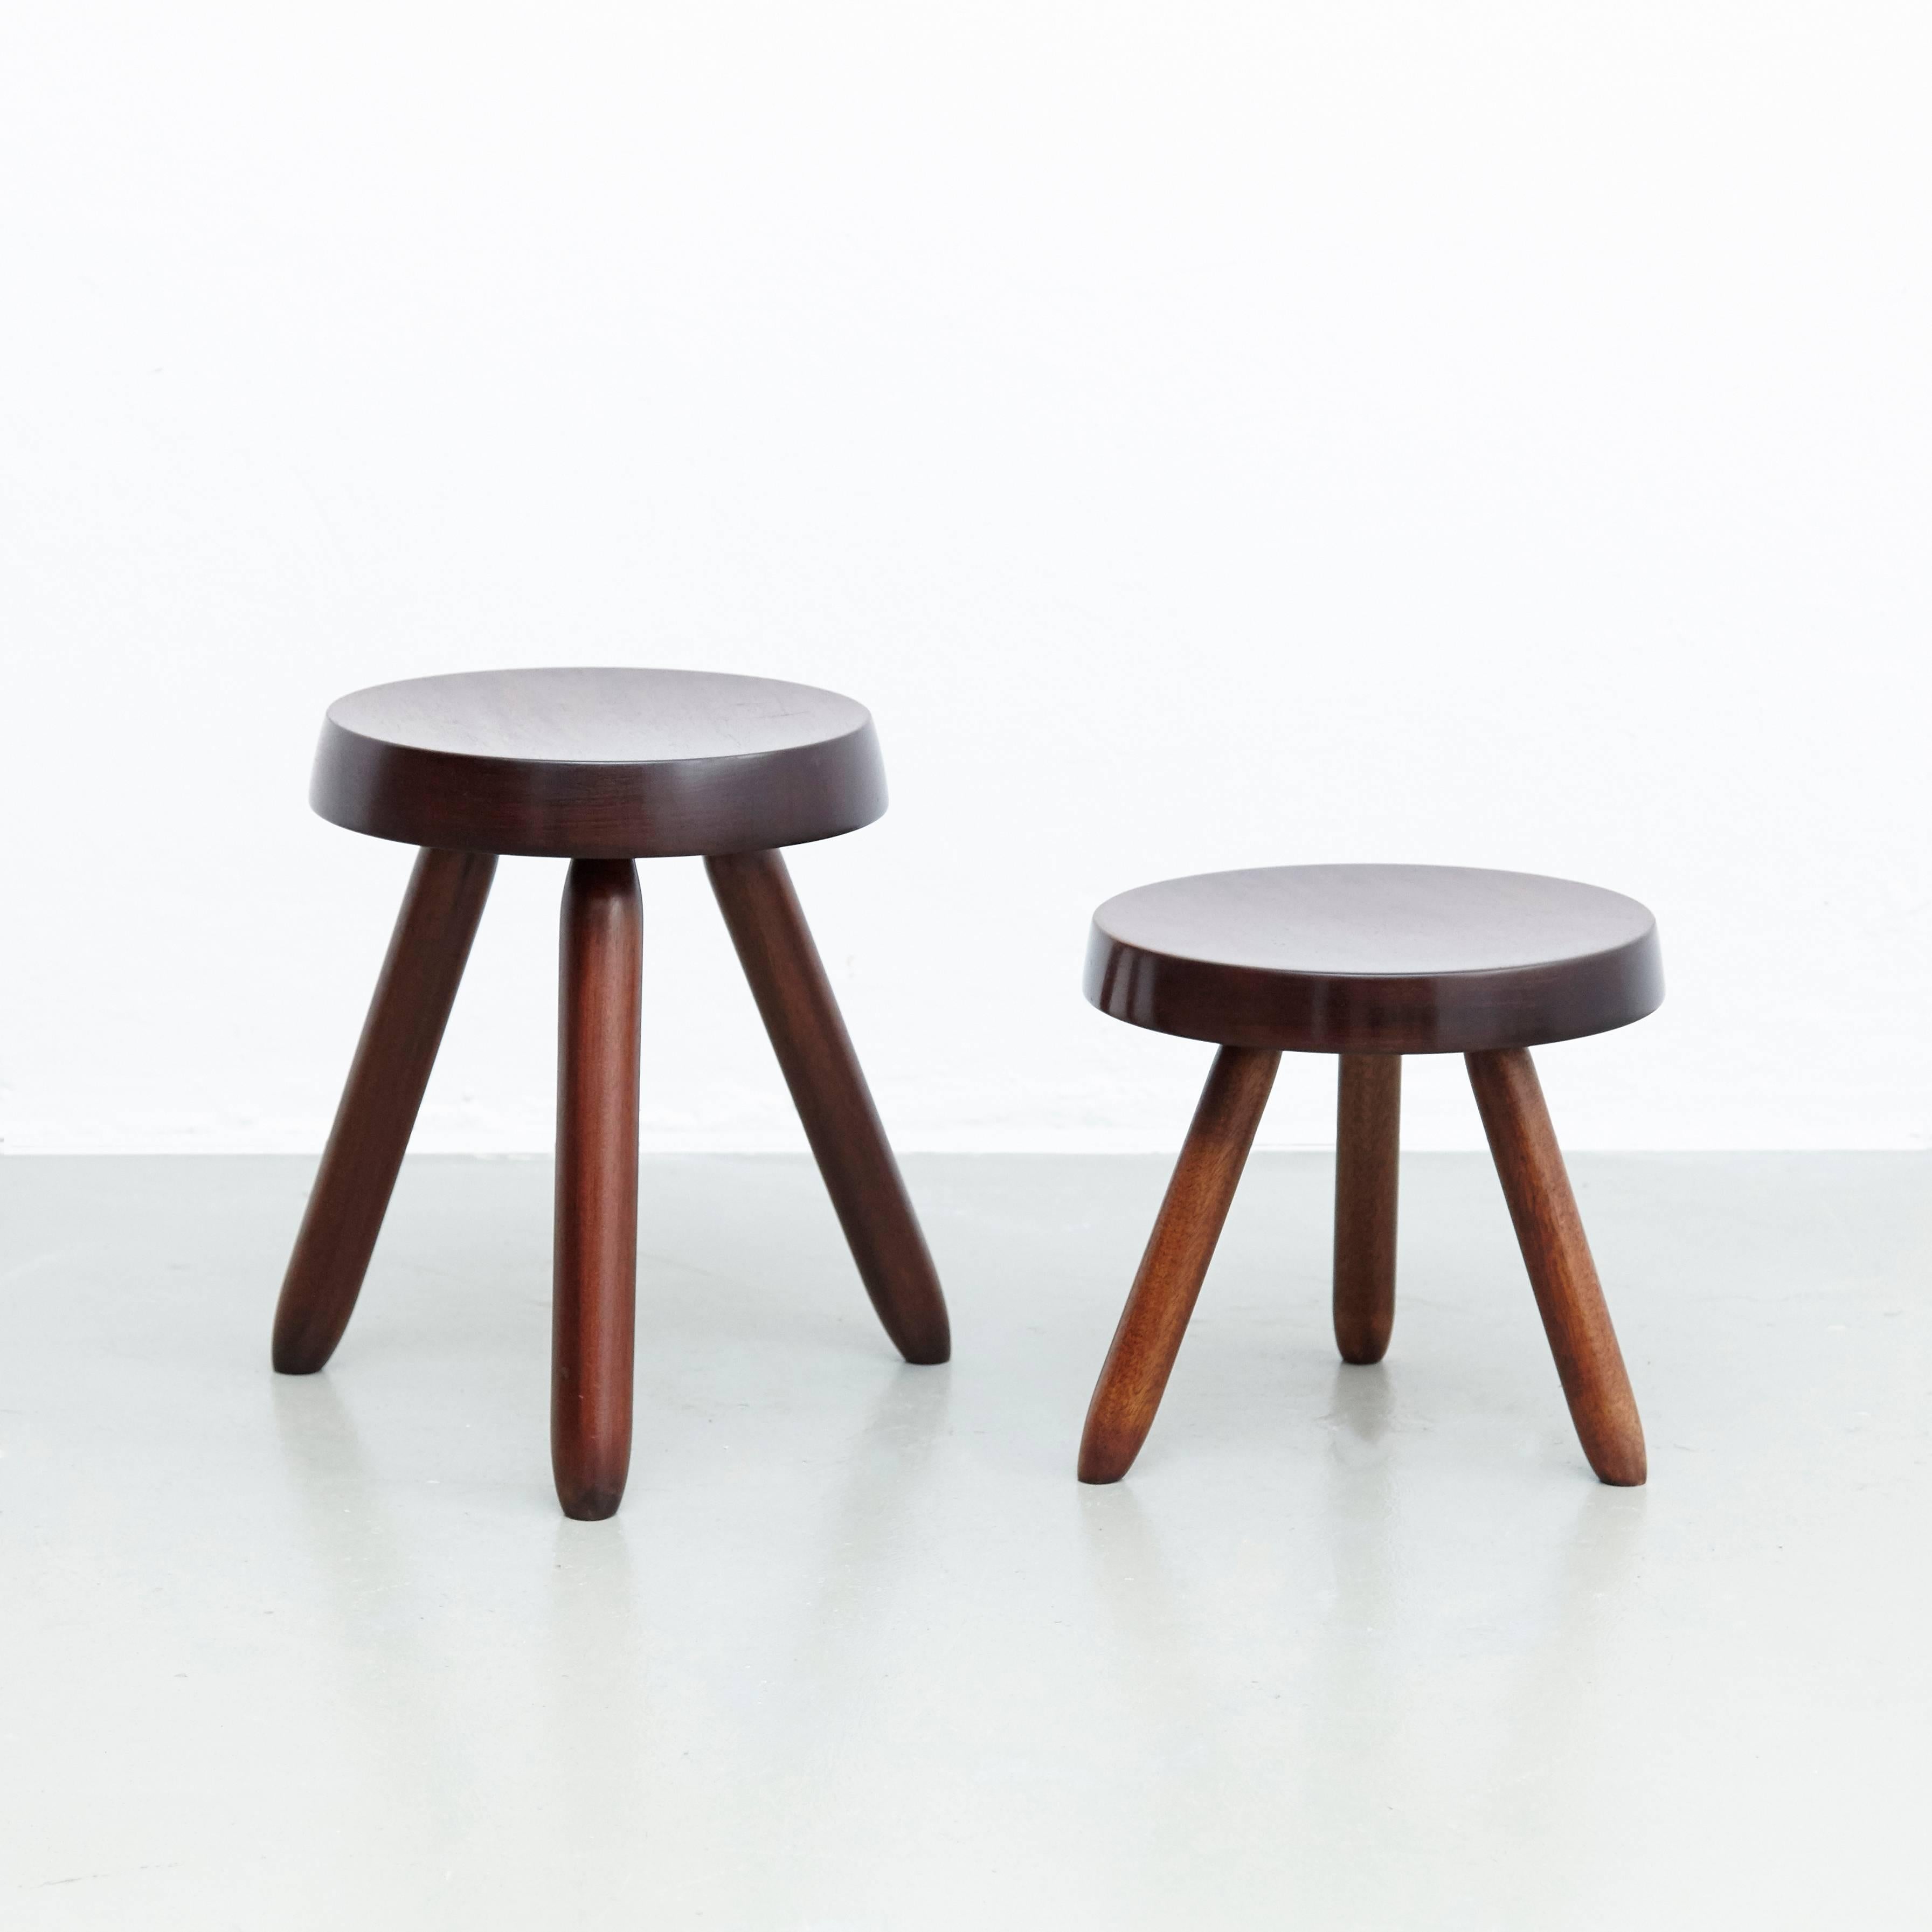 Stools designed in the style of Charlotte Perriand.
Made by unknown manufacturer.

In good original condition, preserving a beautiful patina, with minor wear consistent with age and use. 

Charlotte Perriand (1903-1999) She was born in Paris in